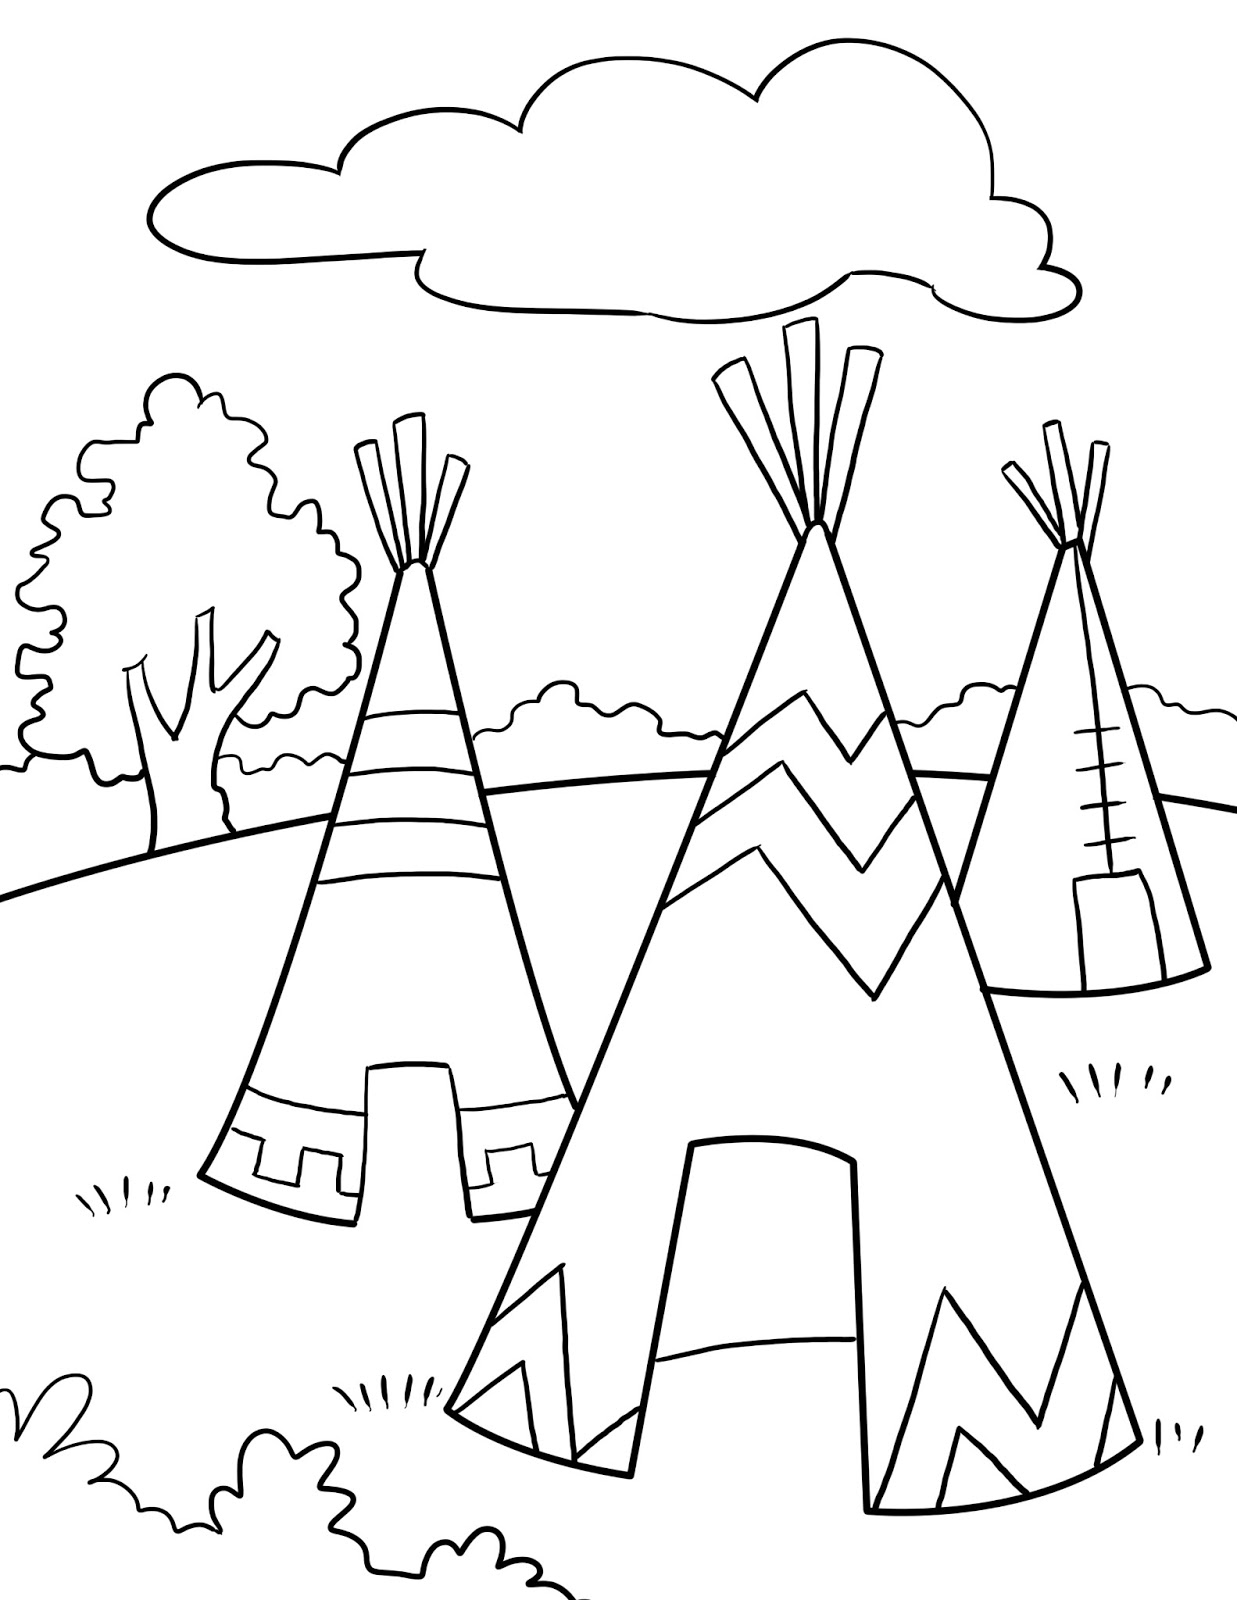 Thanksgiving coloring pictures 3